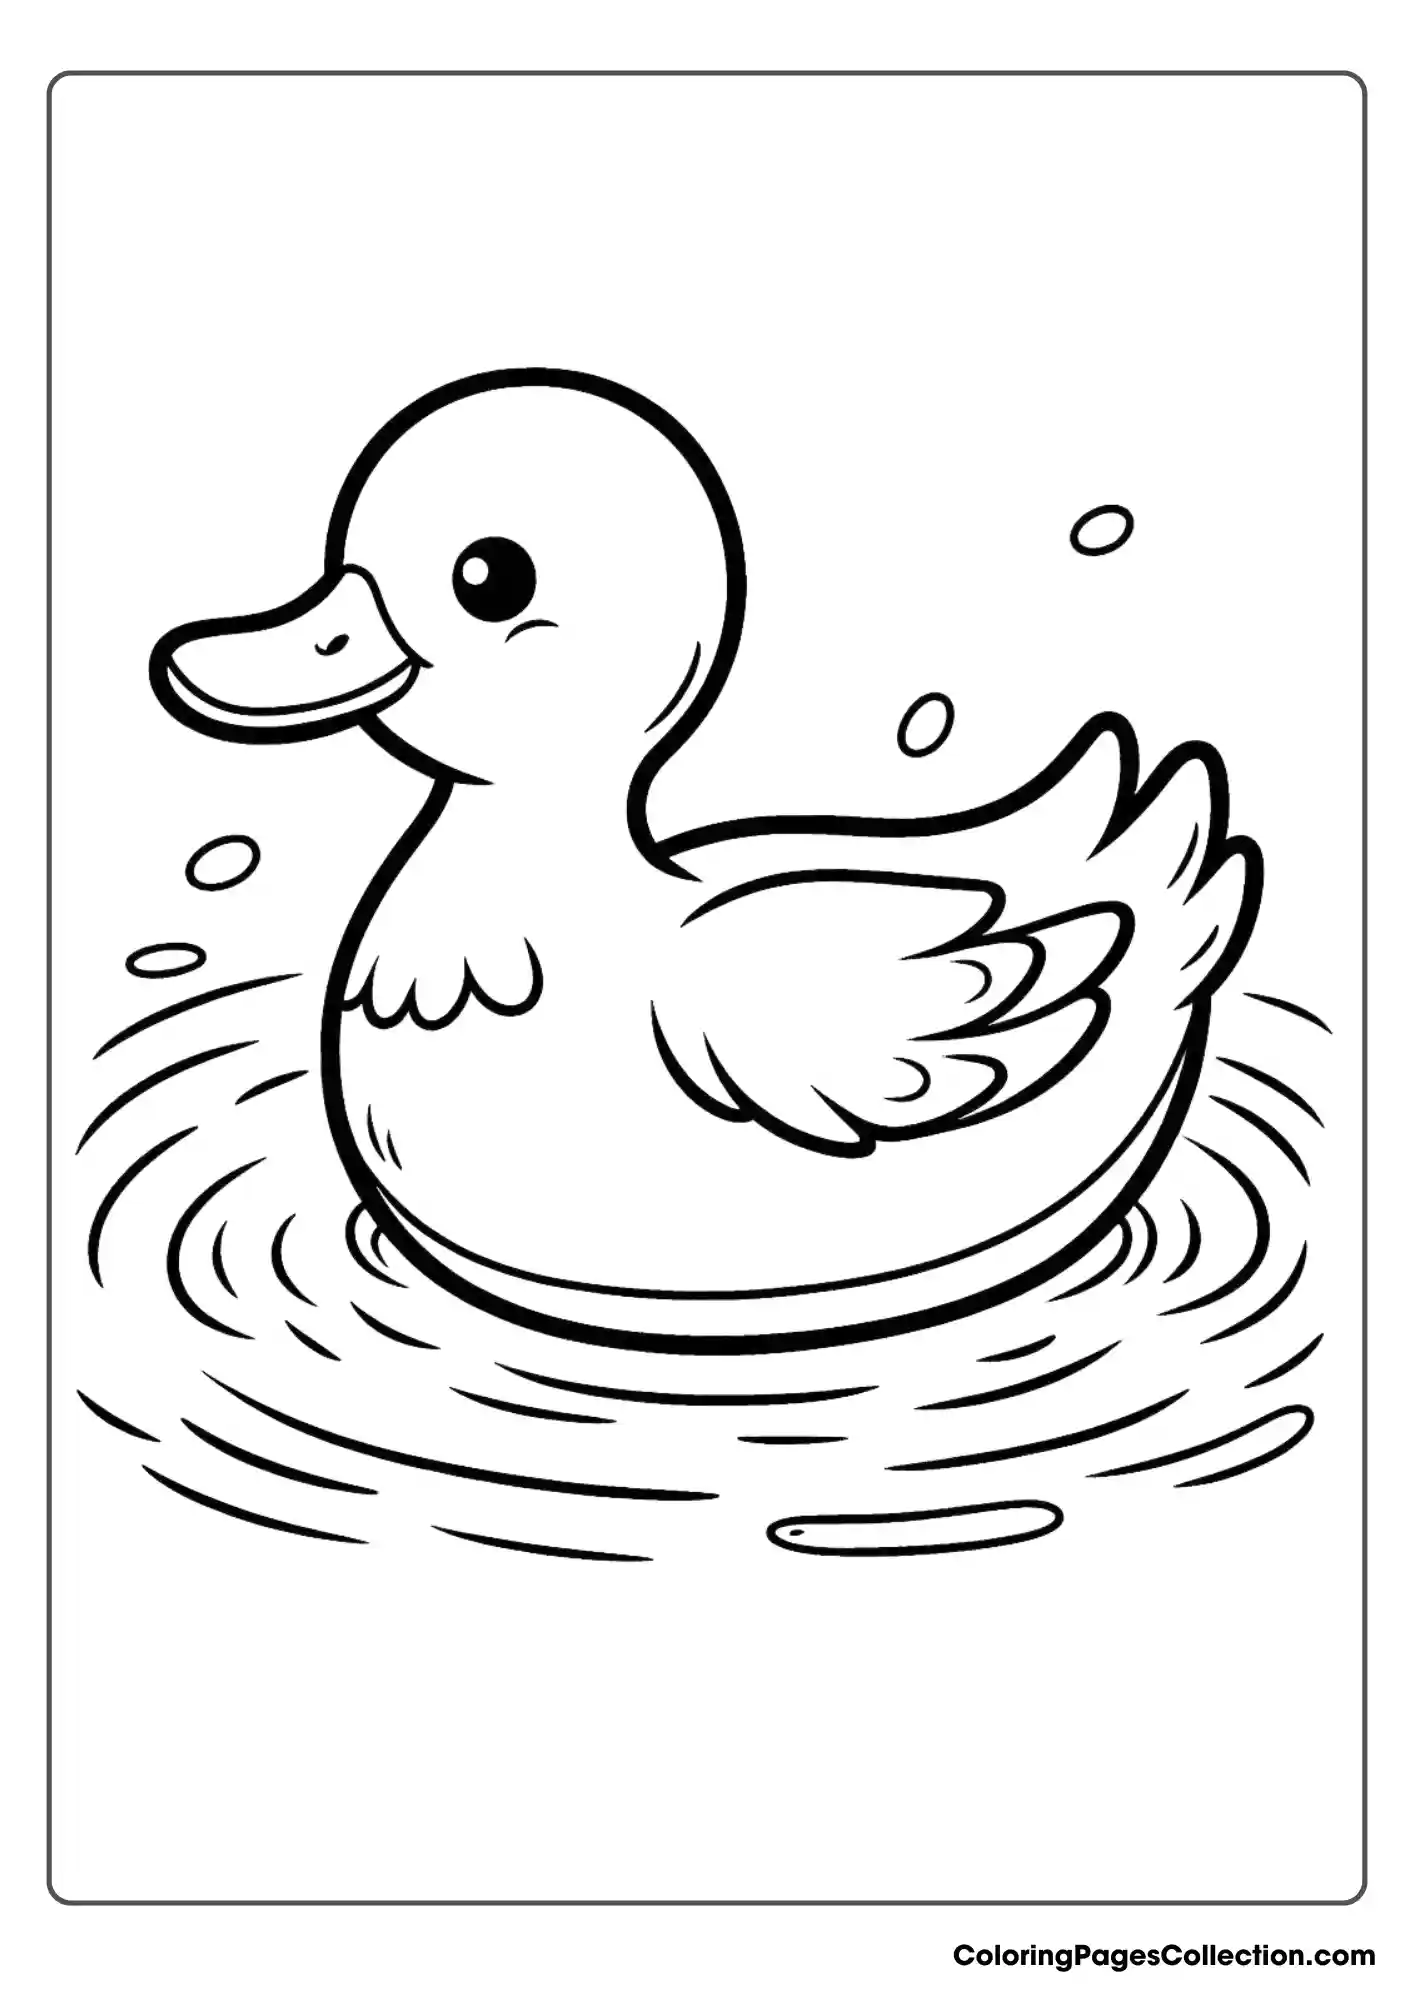 Duck Swimming On A Pond